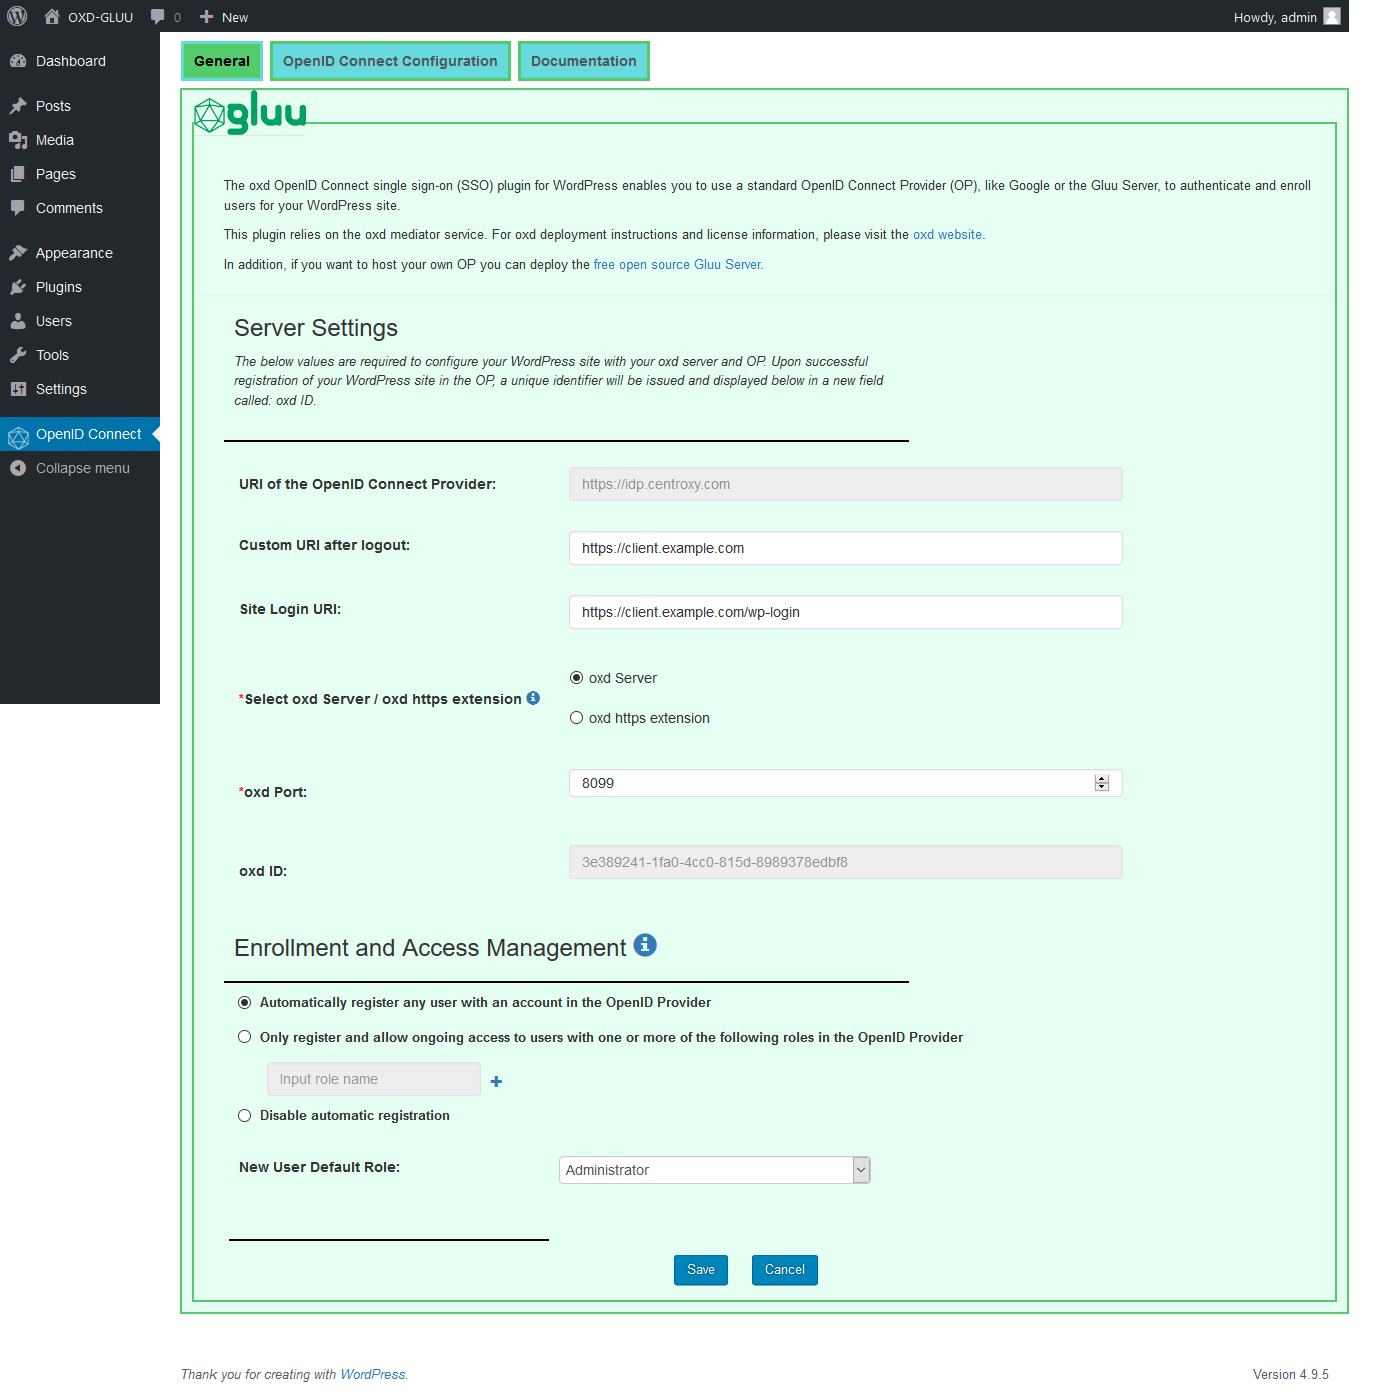 Edit page for OpenID Connect Provider, which supports dynamic registration.